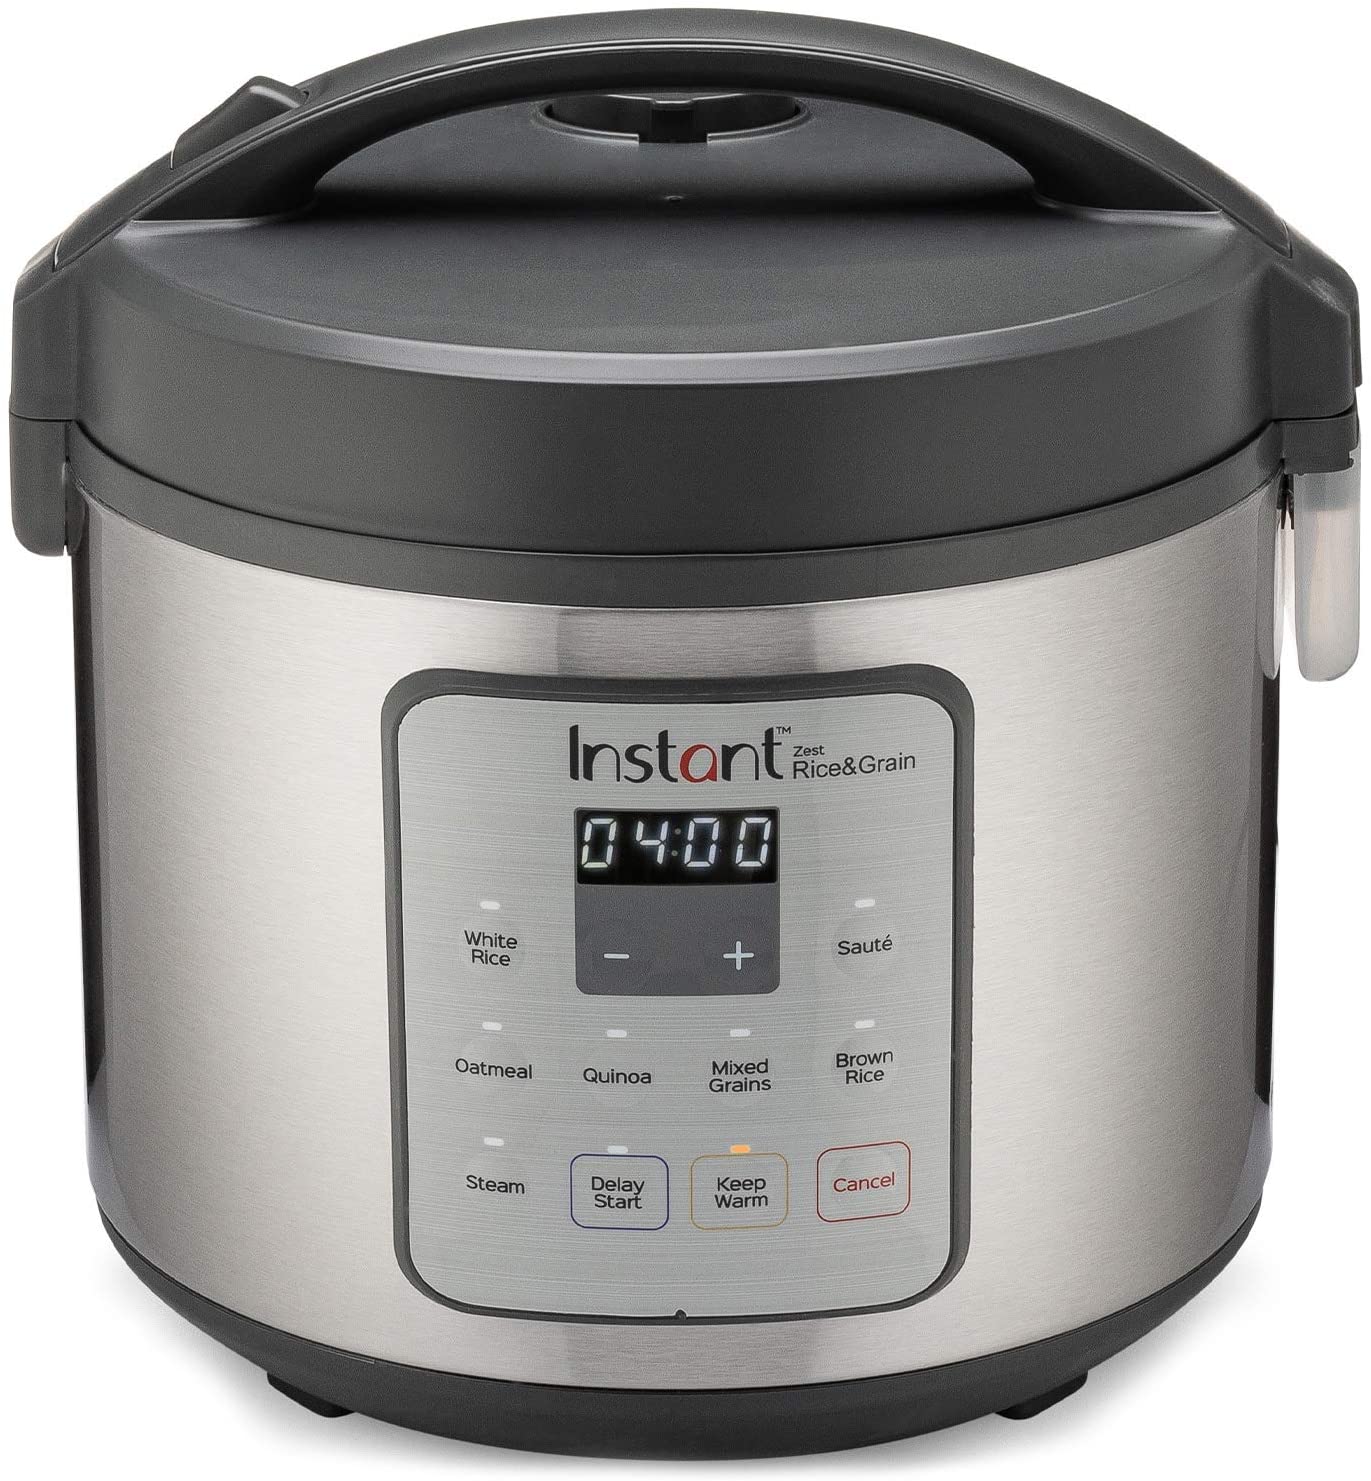 Instant Zest 8-cup Rice Cooker Review - Consumer Reports